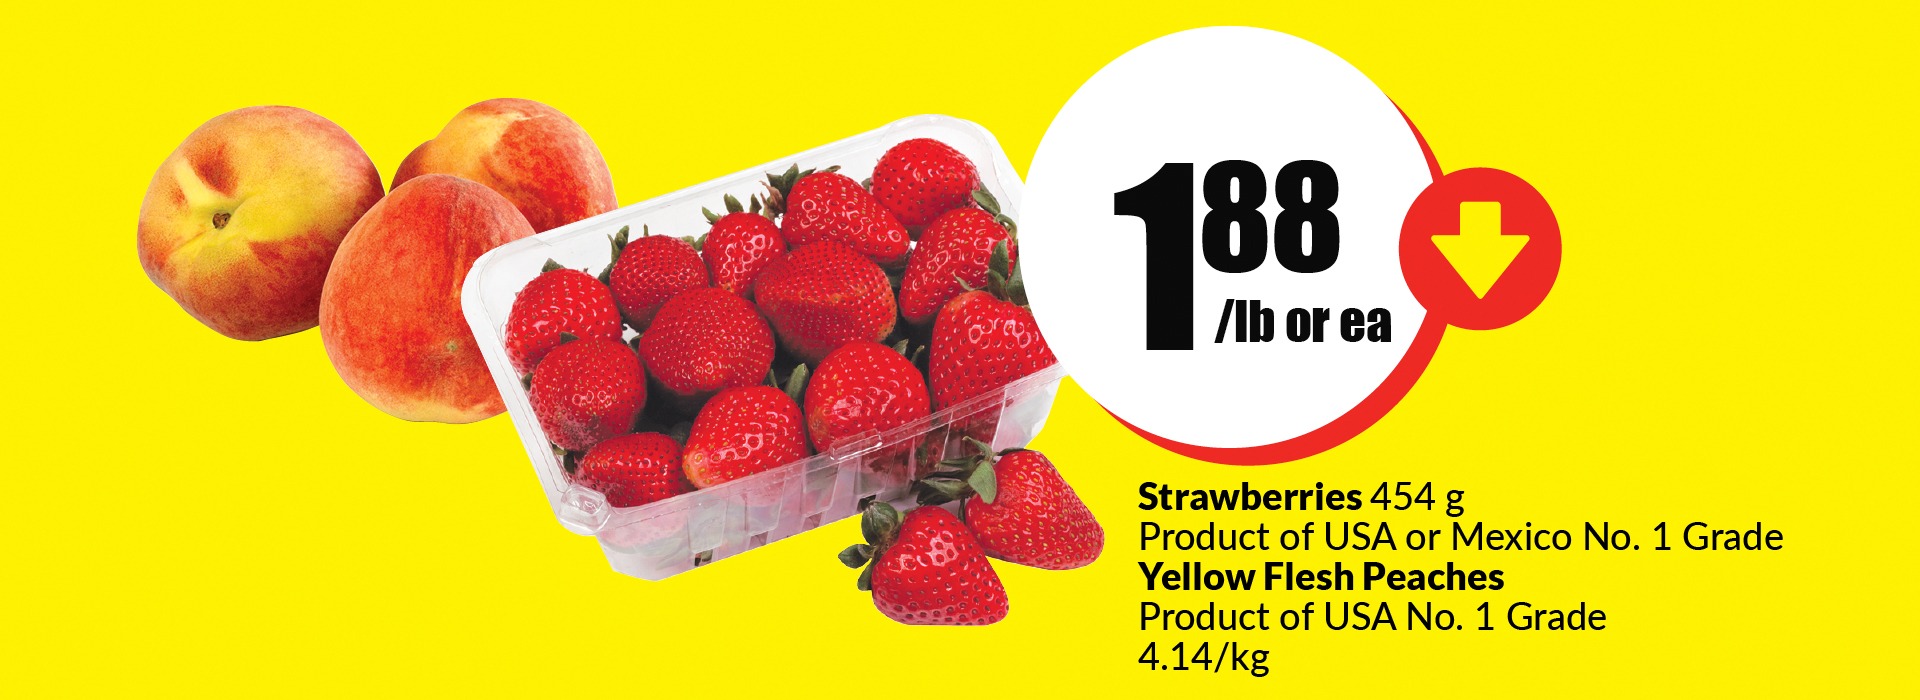 The following image contains the text, "Buy Strawberries 454 grams pack. Product of USA or Mexico No. 1 Grade at $1.88 per pound."